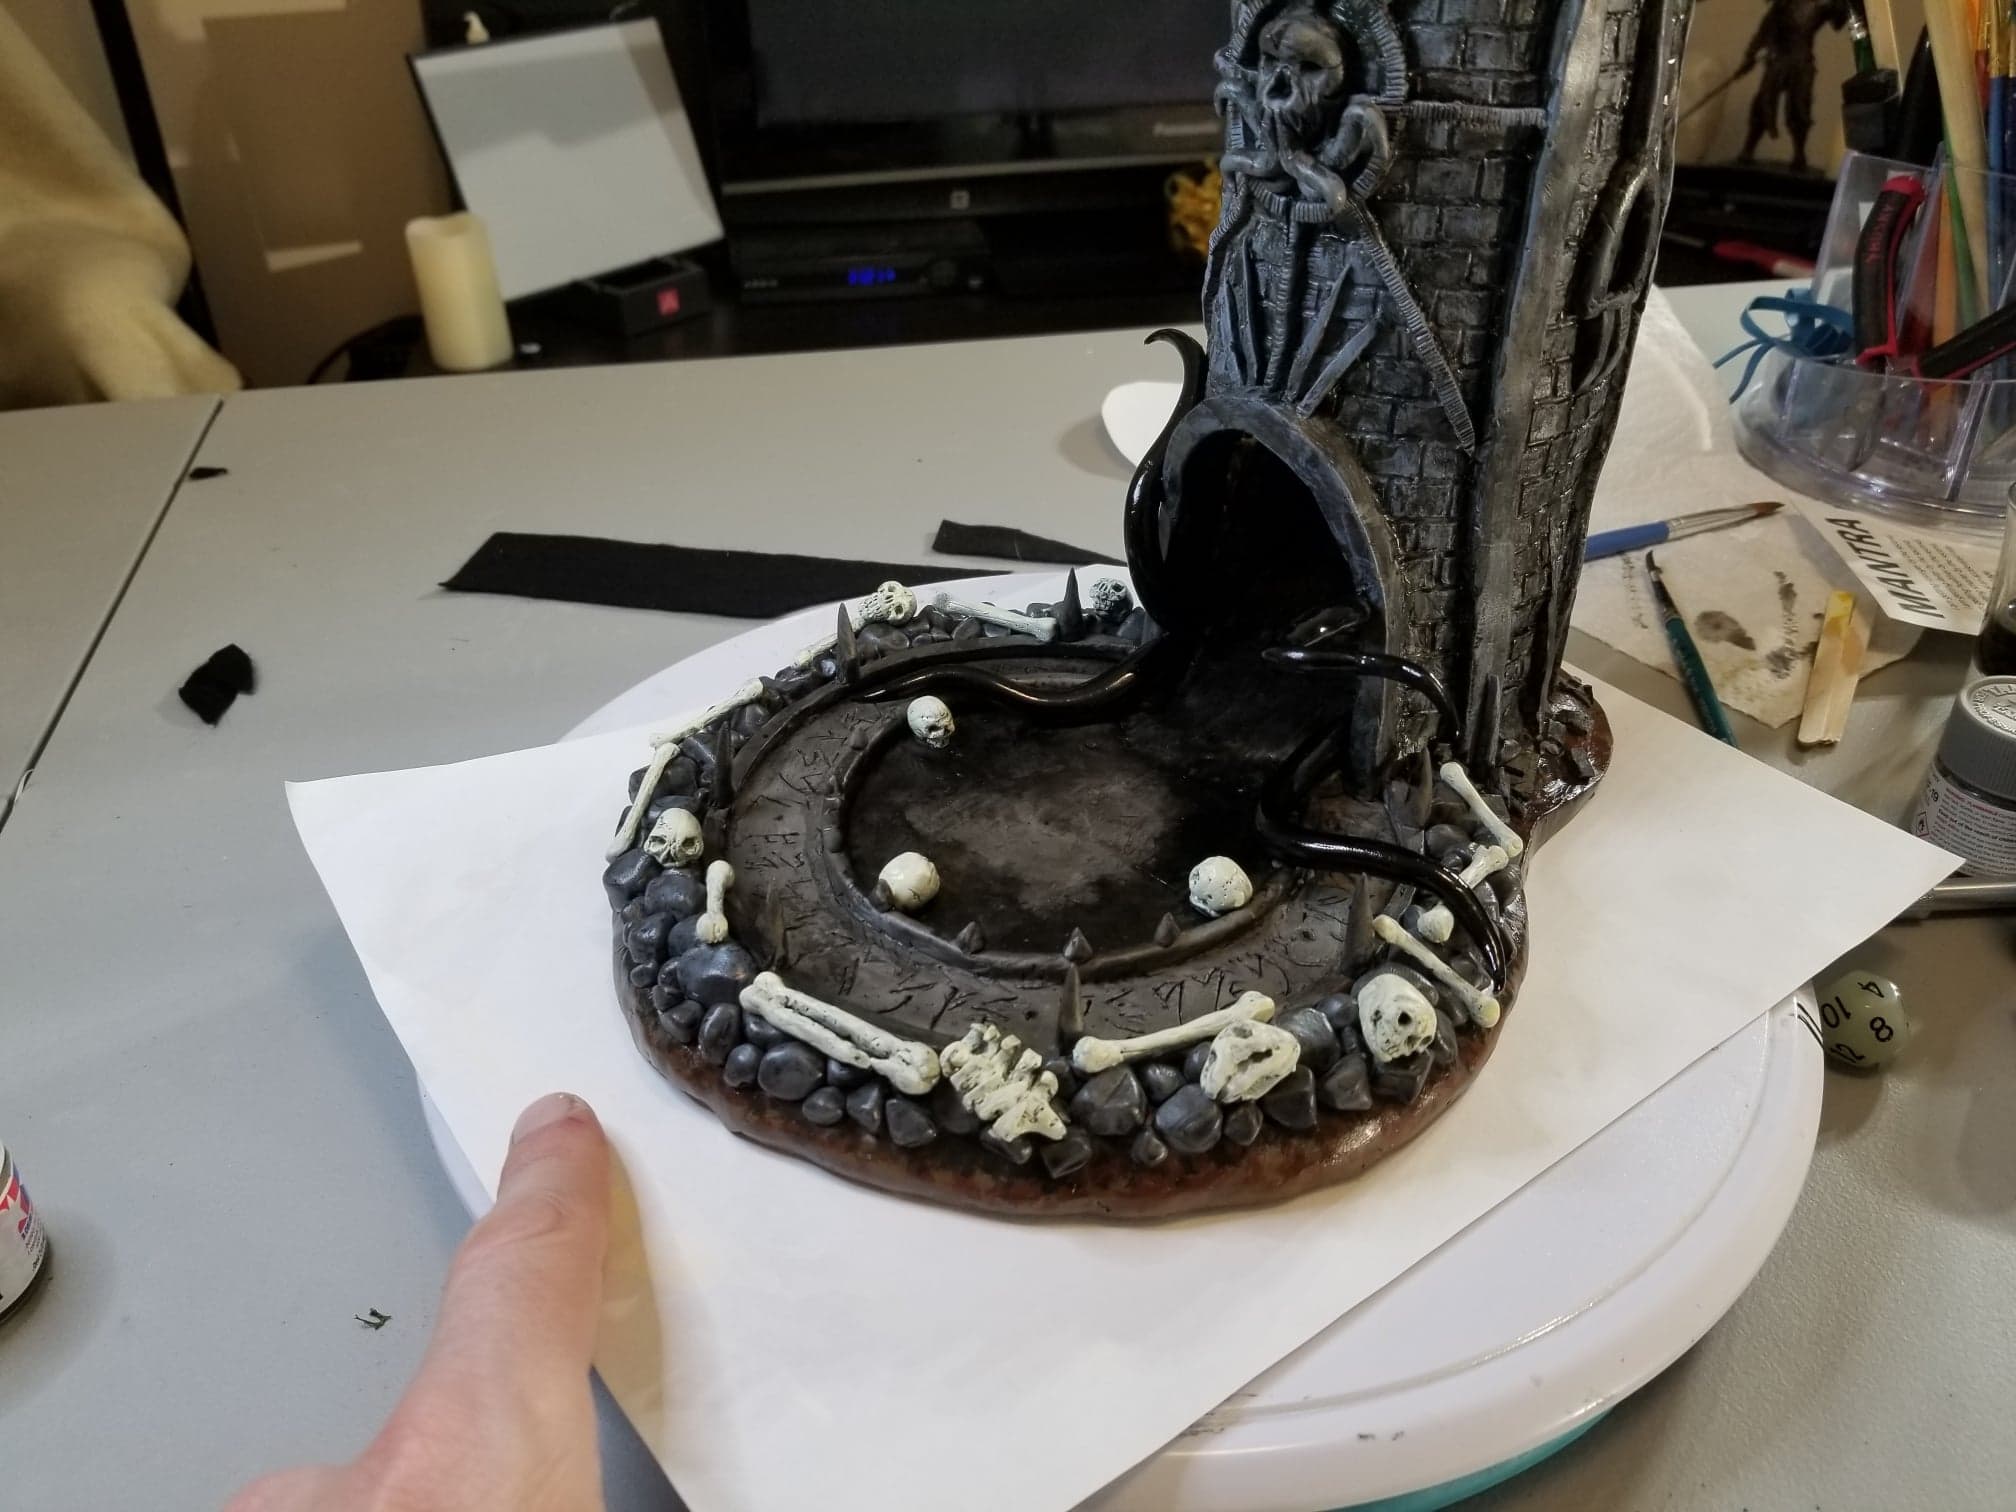 Painting the Dice Tower